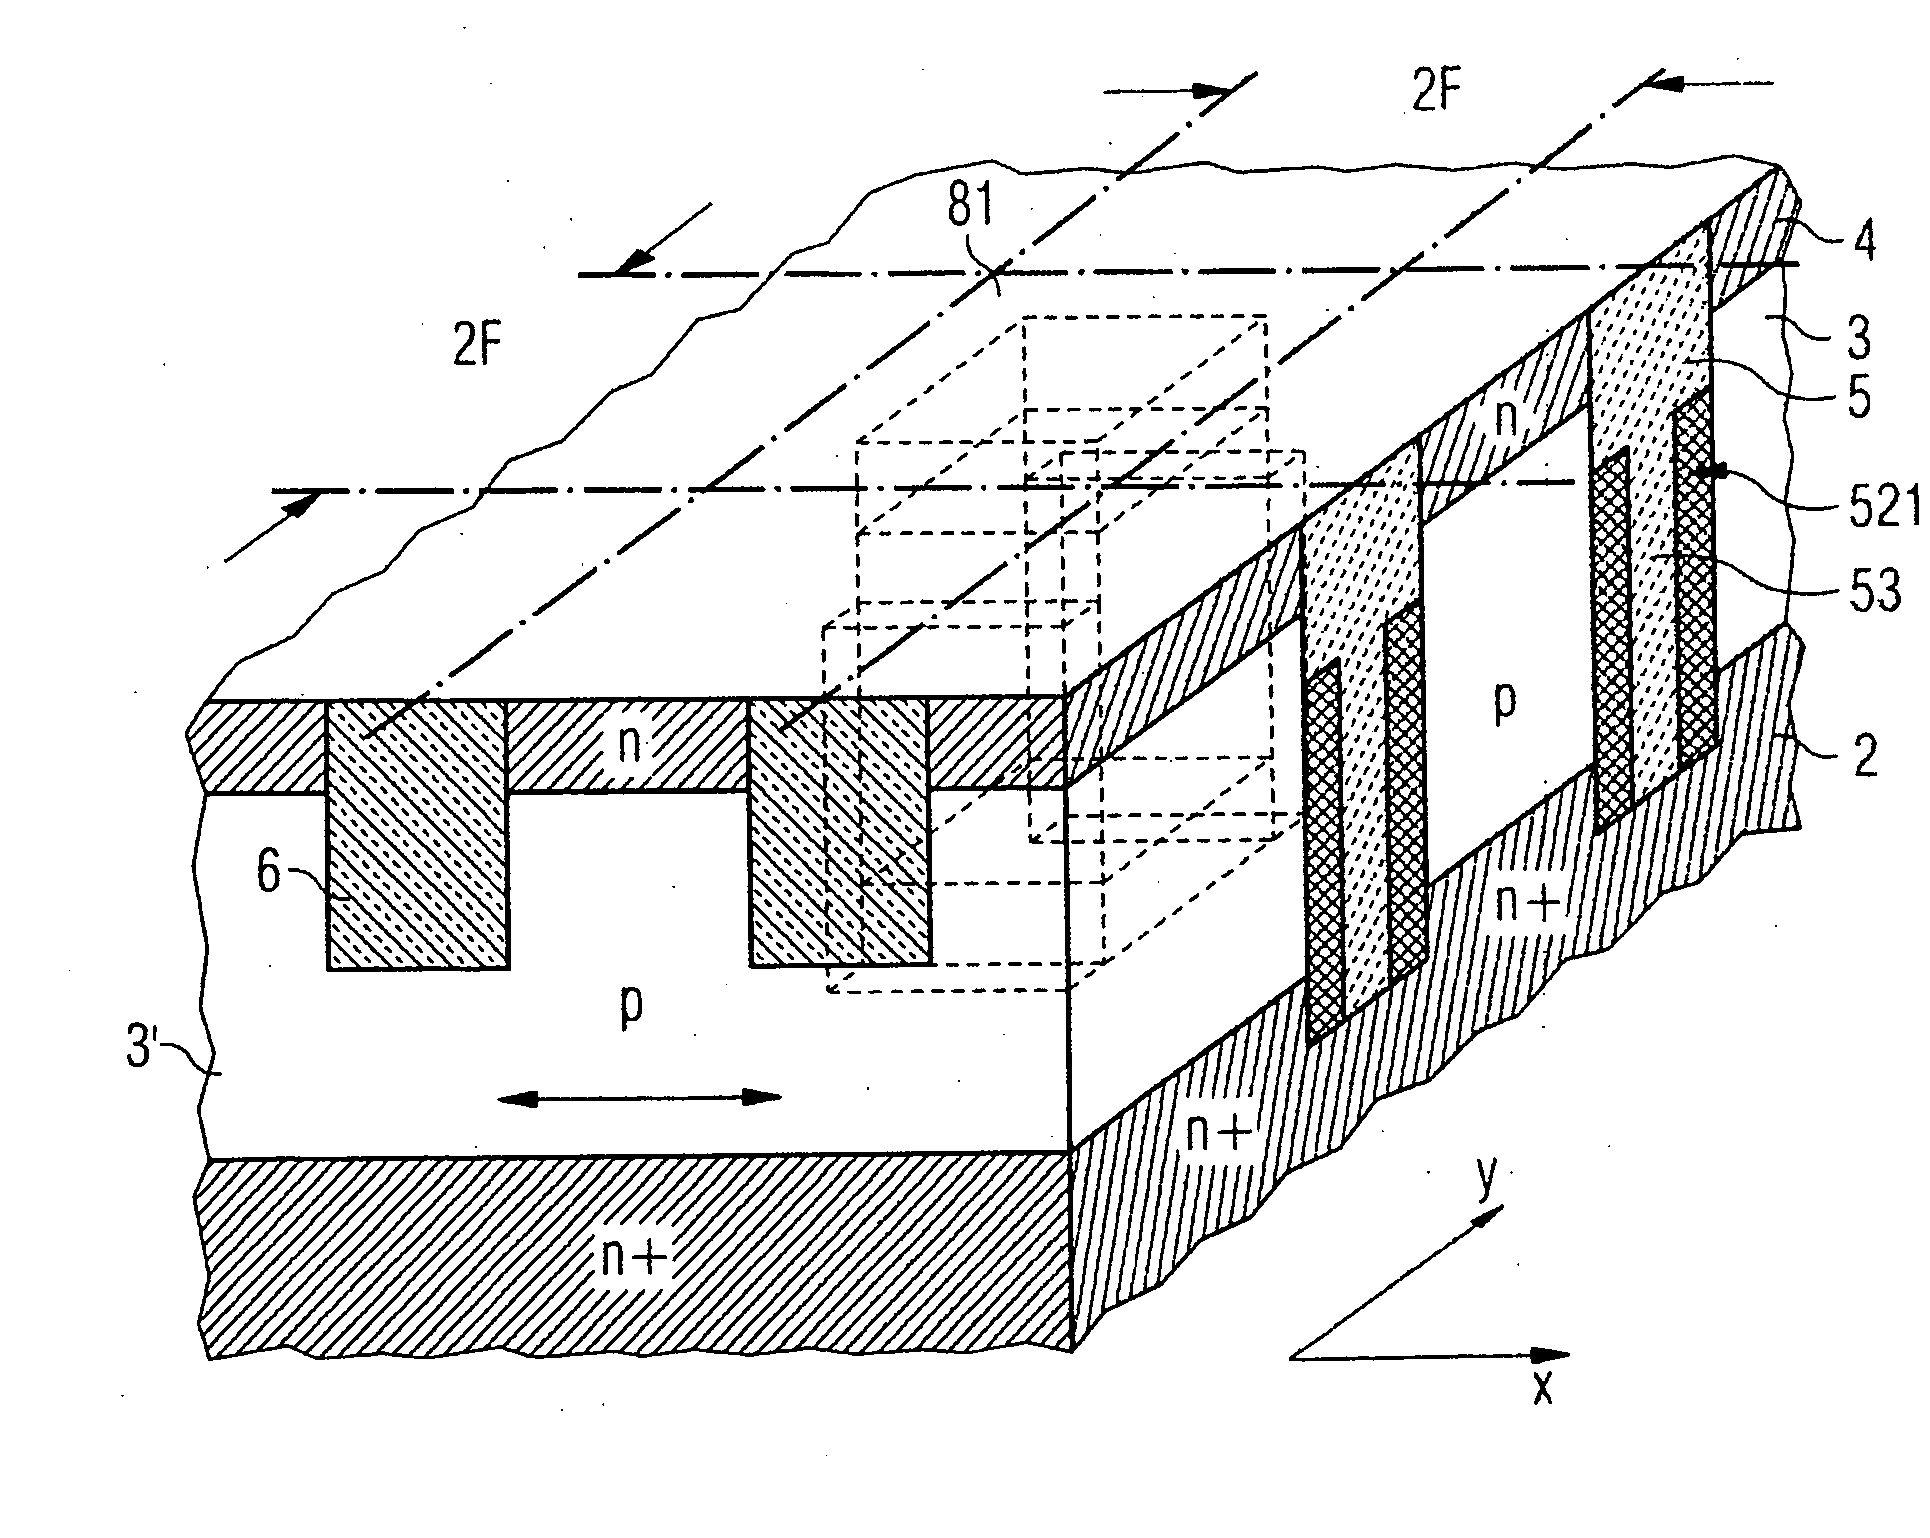 Method of fabricating and architecture for vertical transistor cells and transistor-controlled memory cells